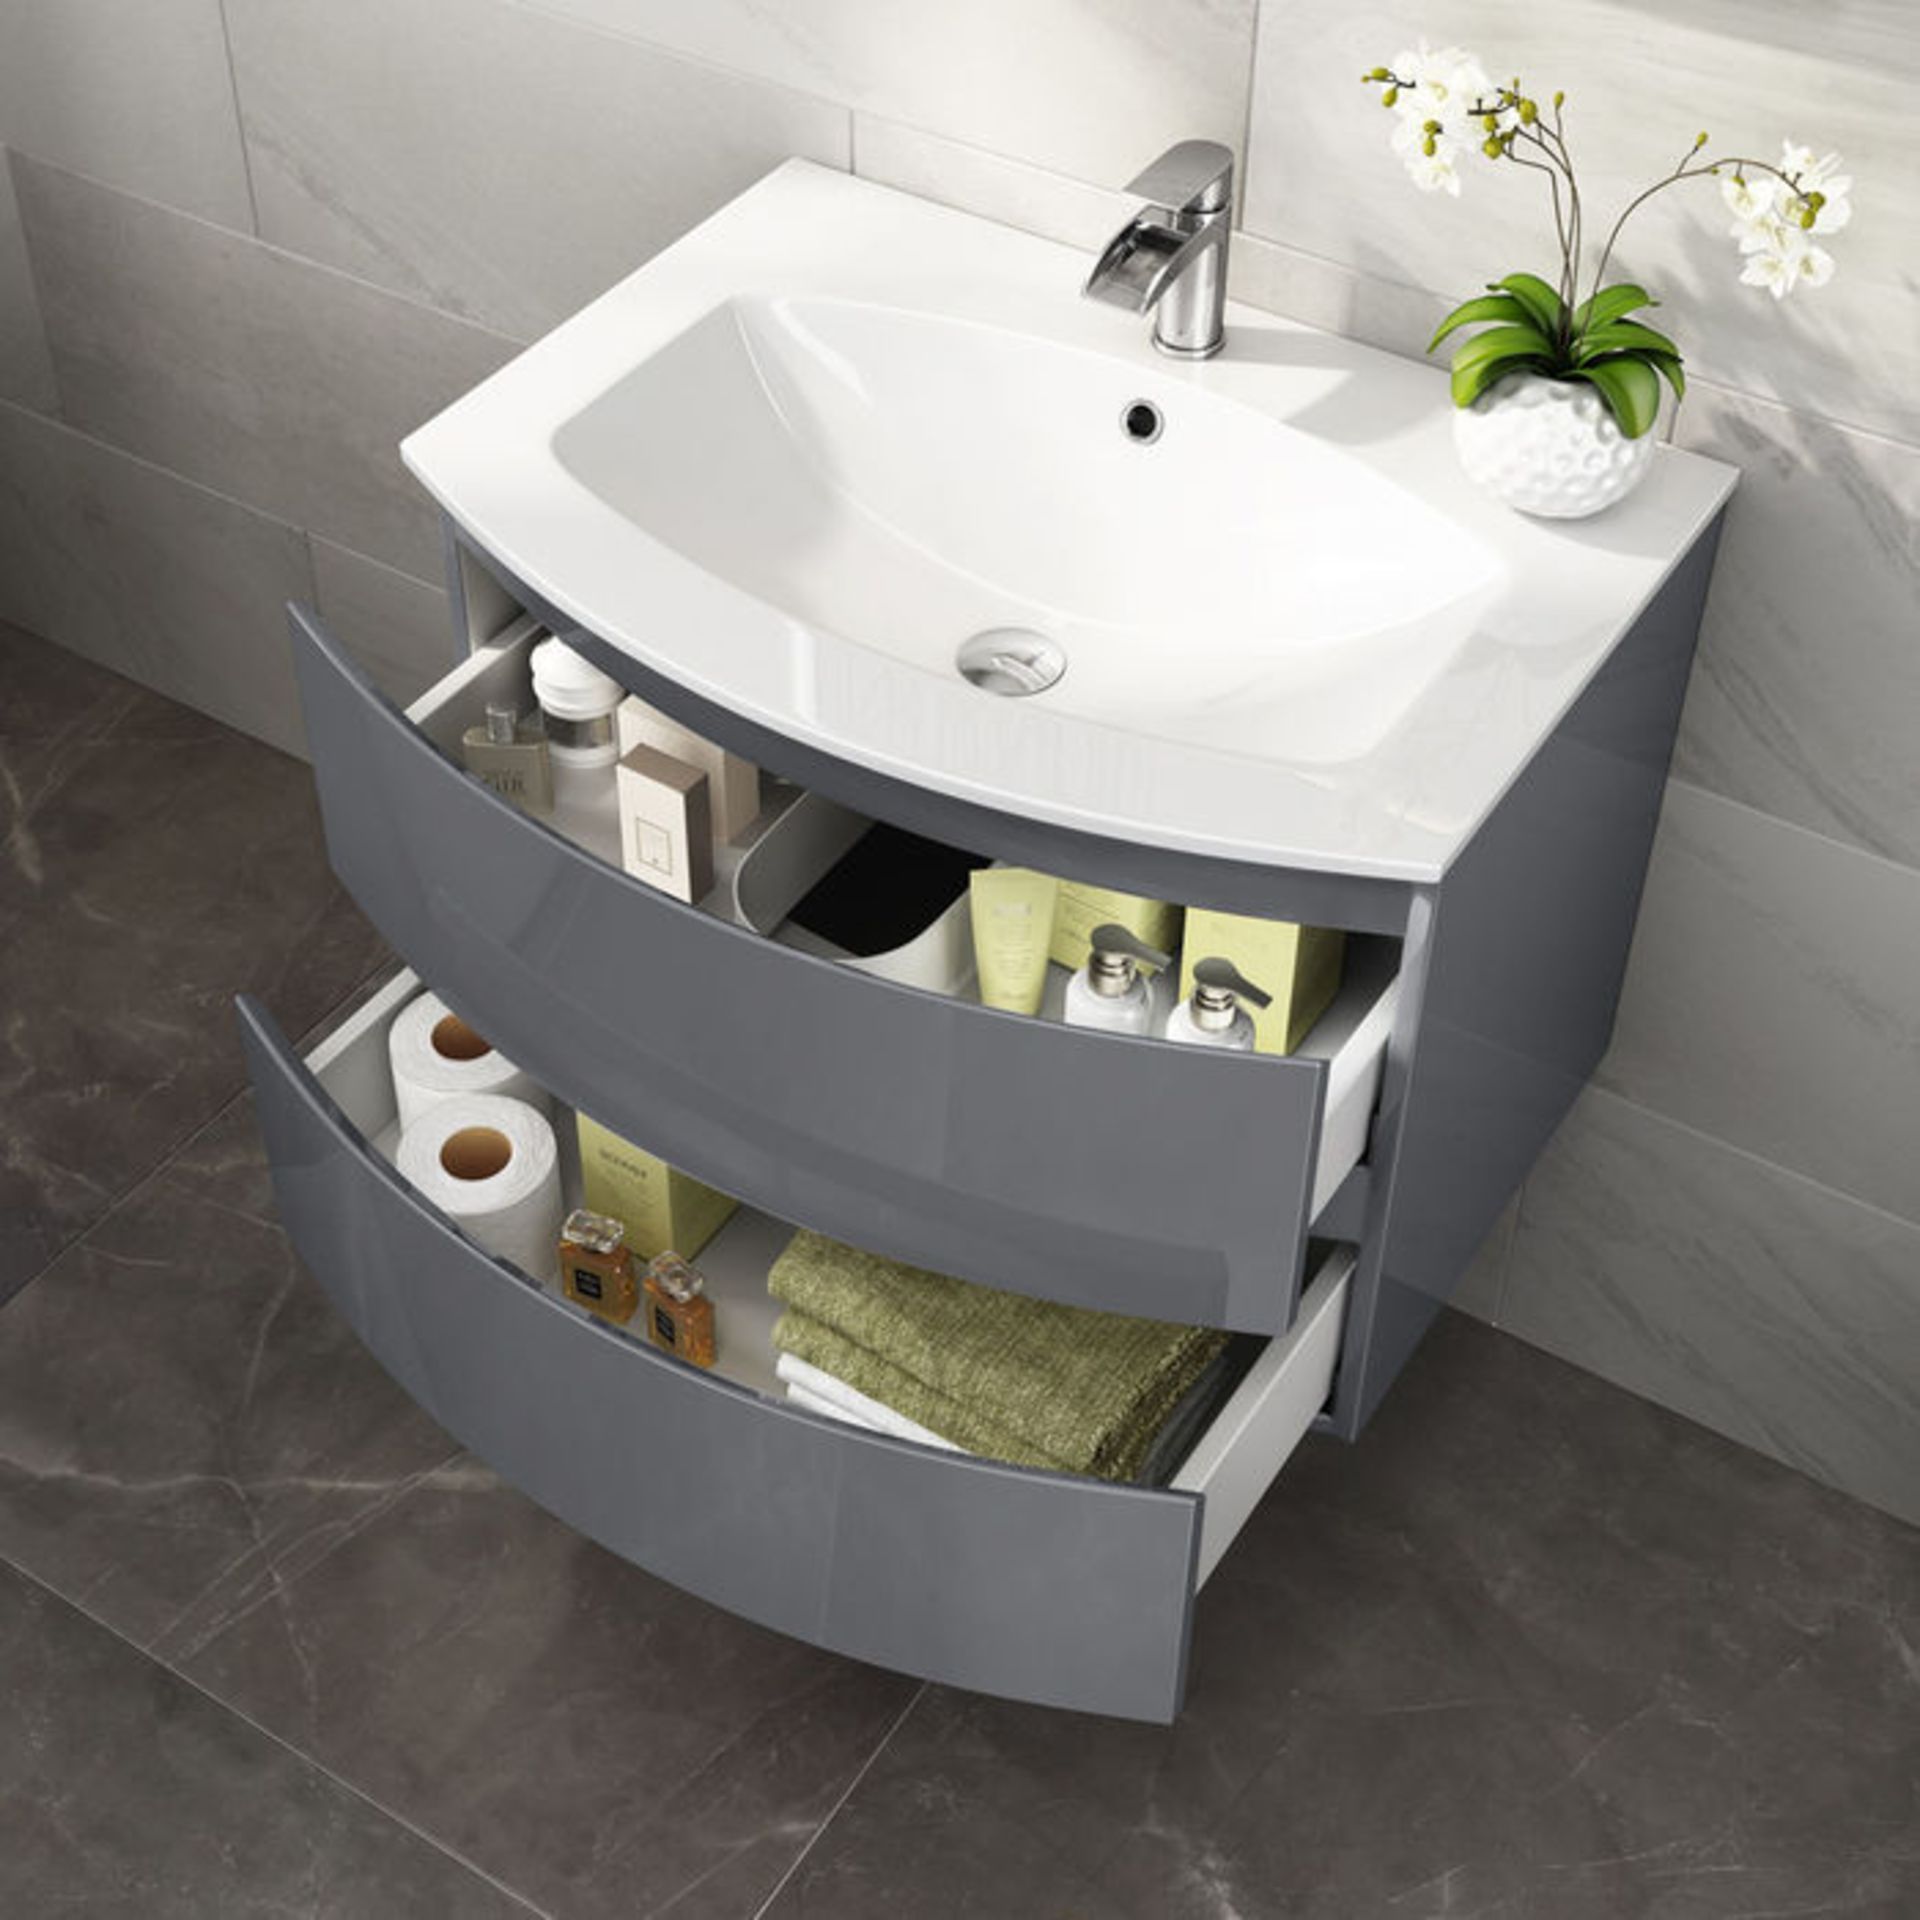 New & Boxed 700mm Amelie Gloss Grey Curved Vanity Unit - Wall Hung. RRP £999.99.Comes Complet... - Image 2 of 2